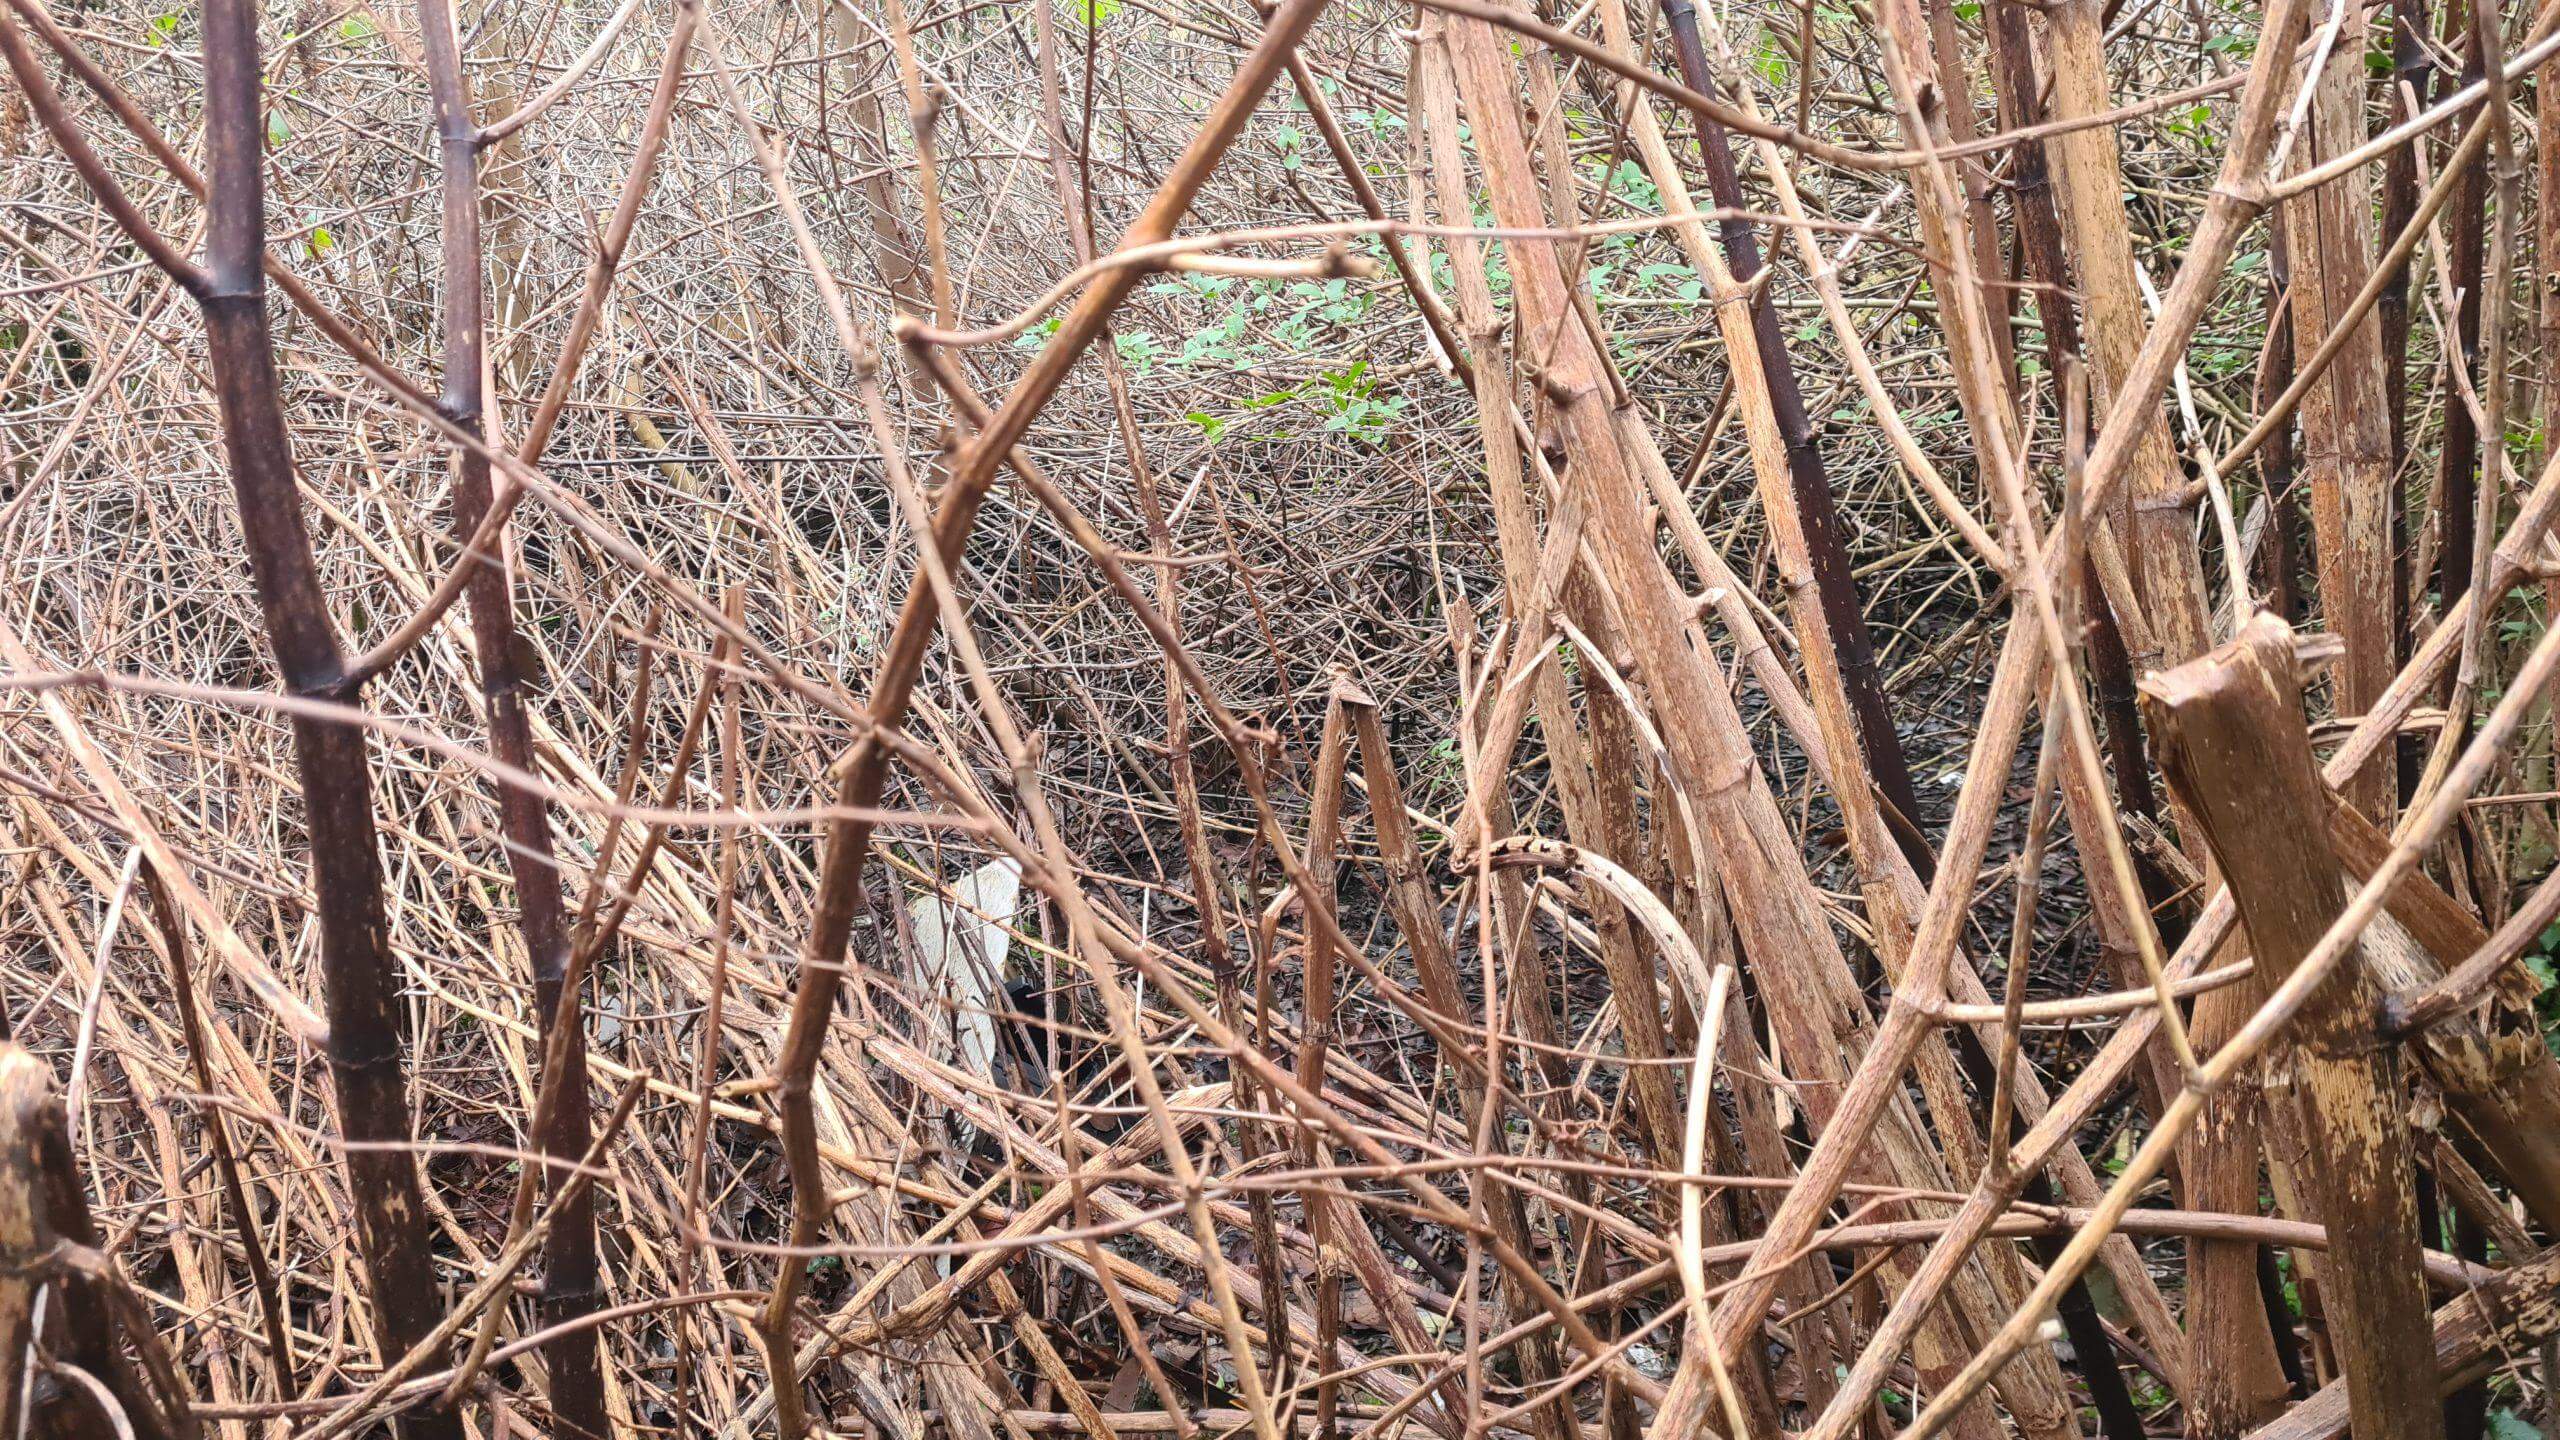 Dead Japanese knotweed stems droop over during winter